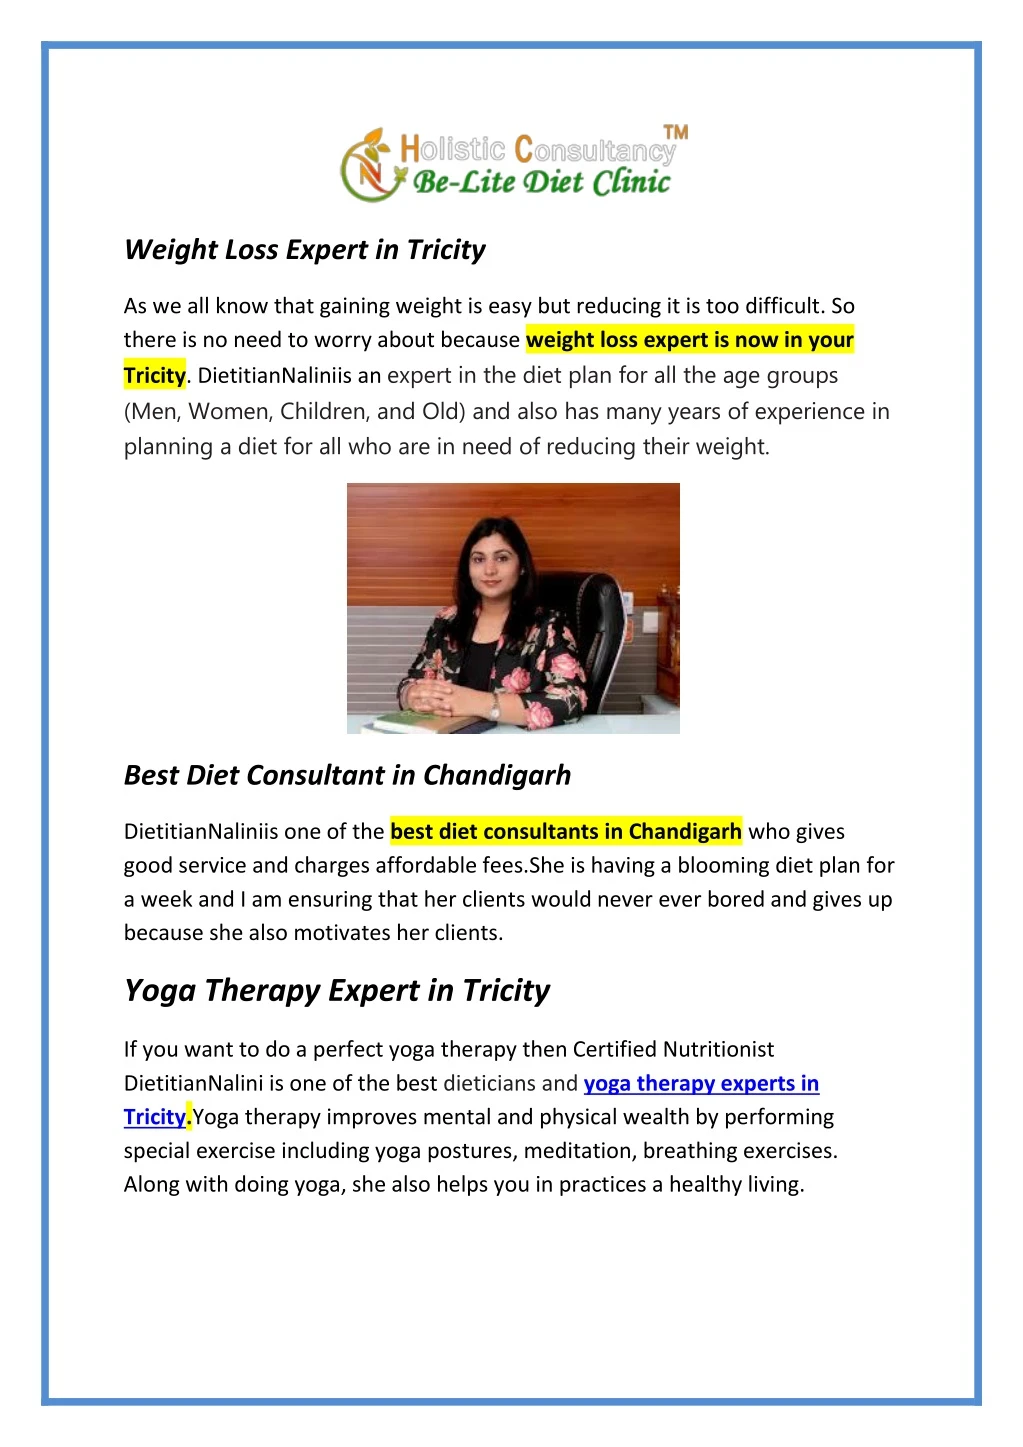 weight loss expert in tricity